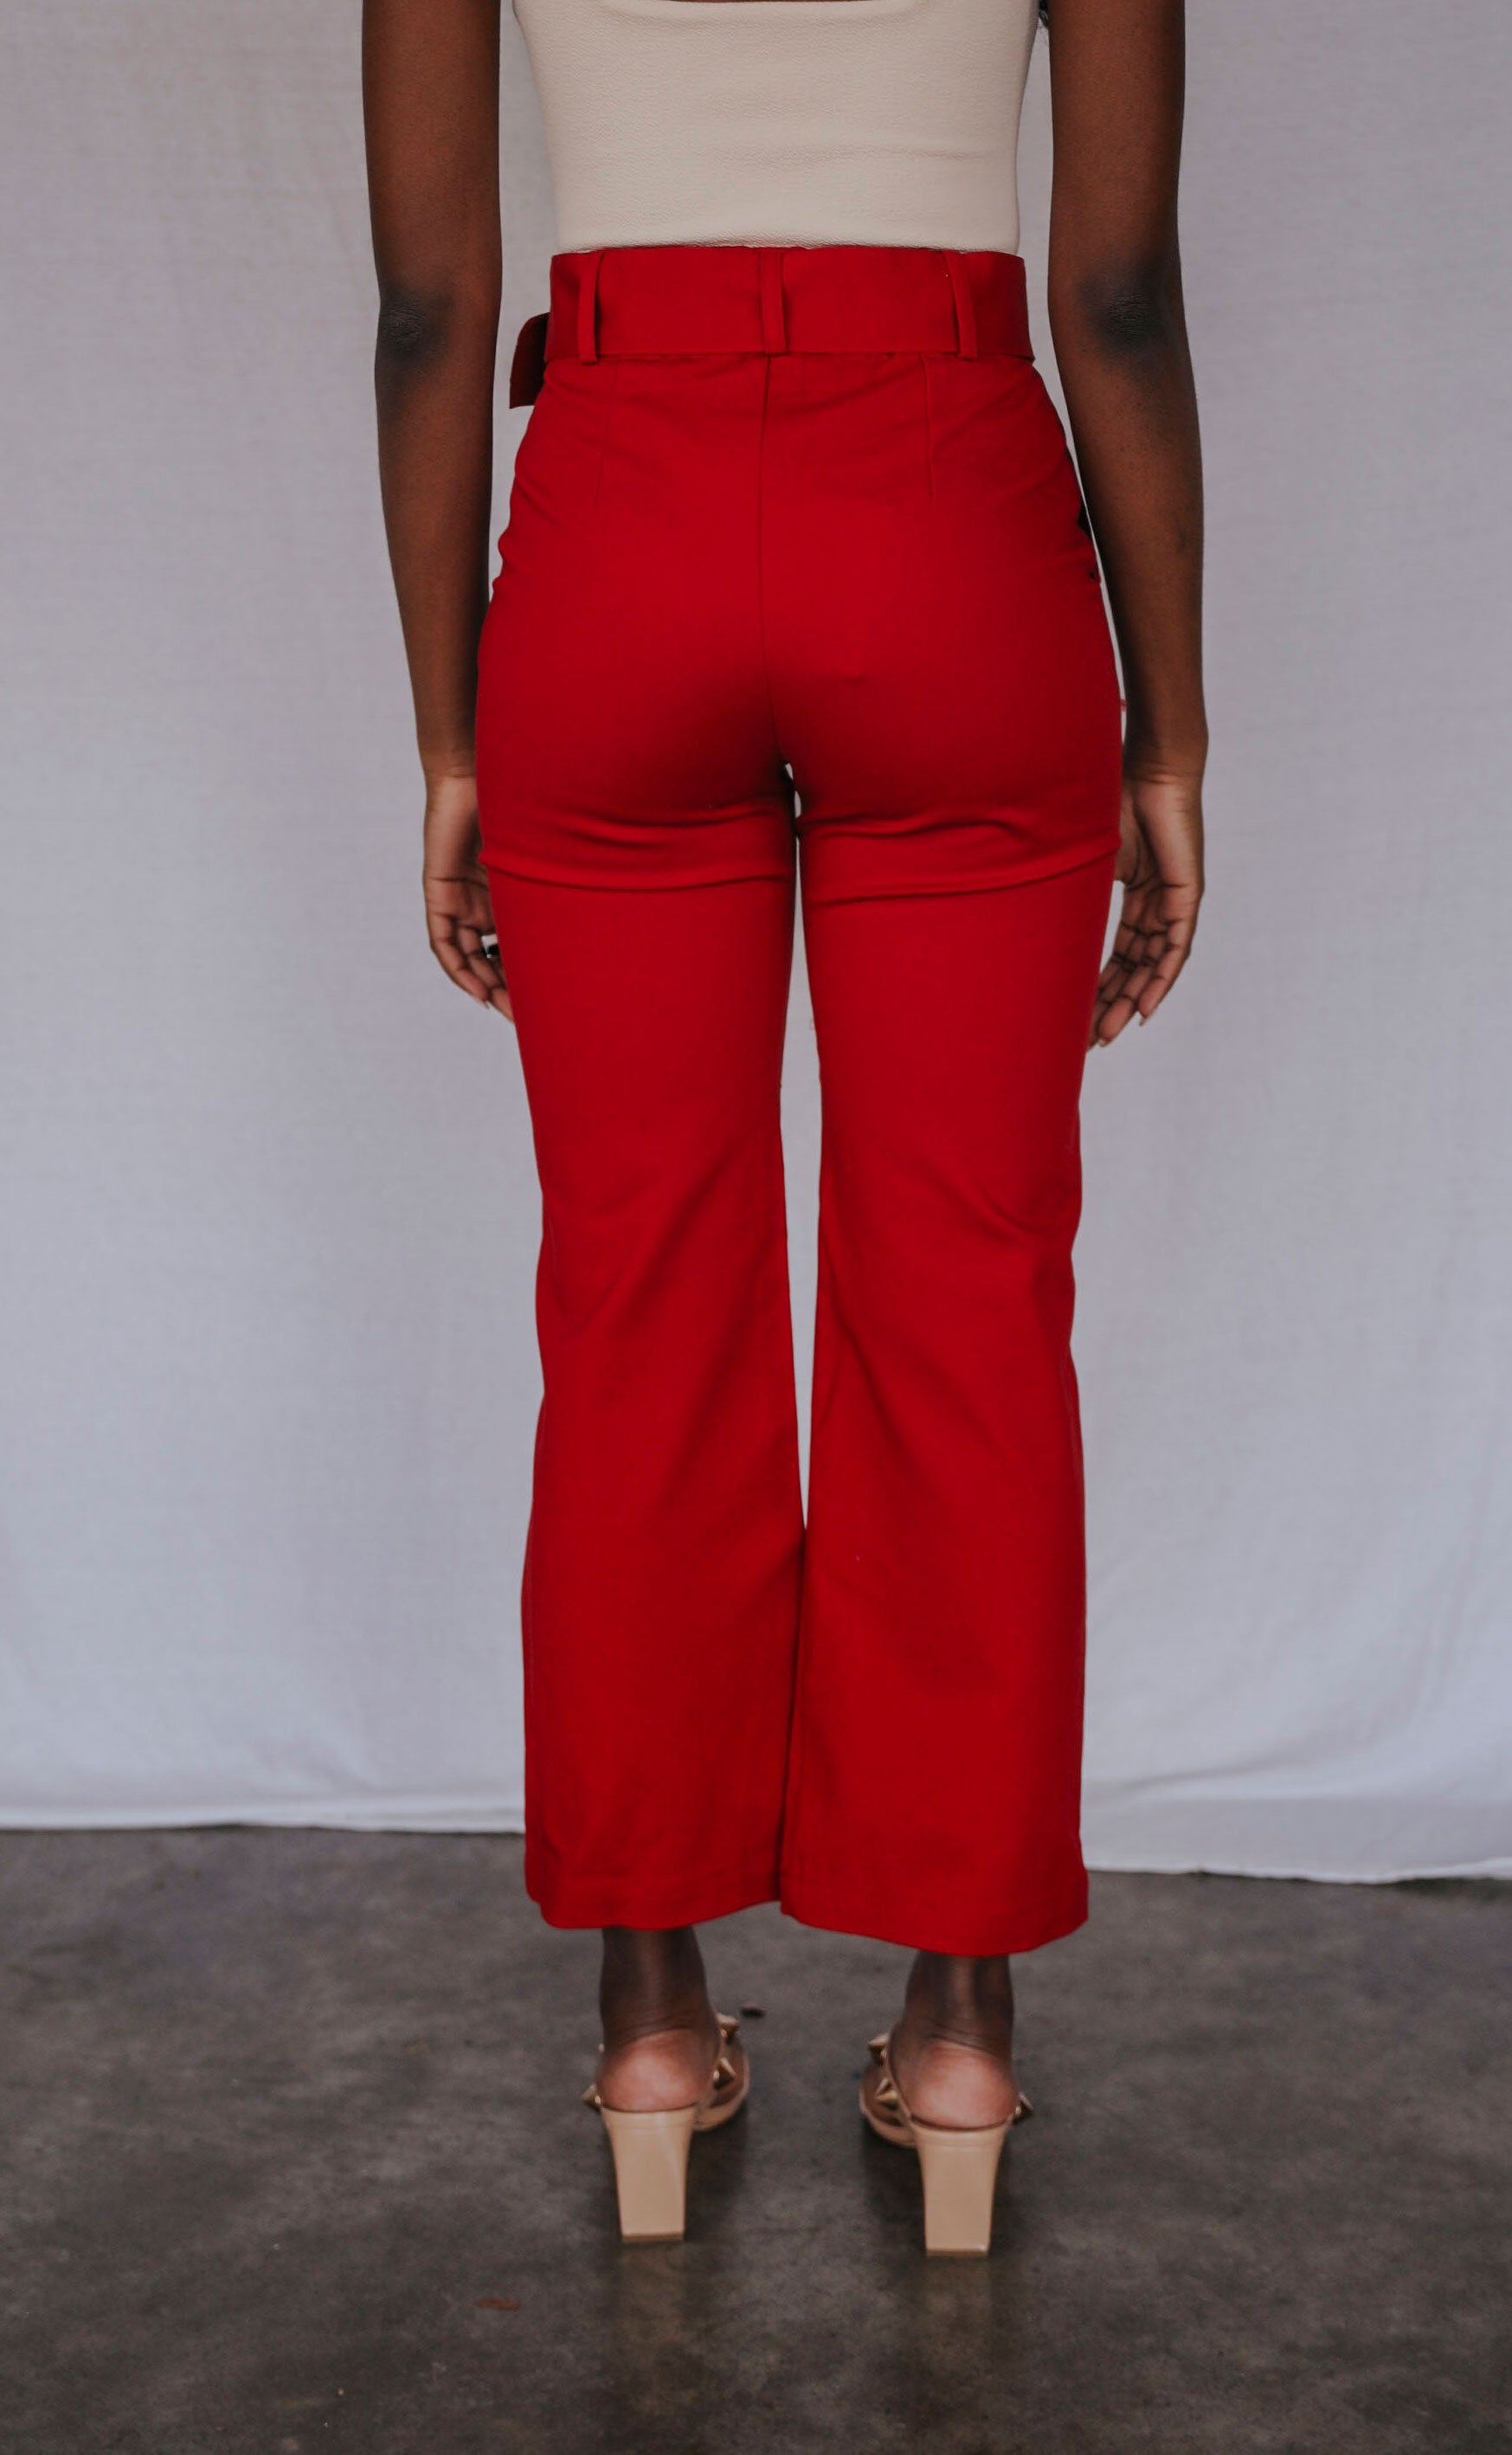 Red Trouser Show  smb815  Flickr